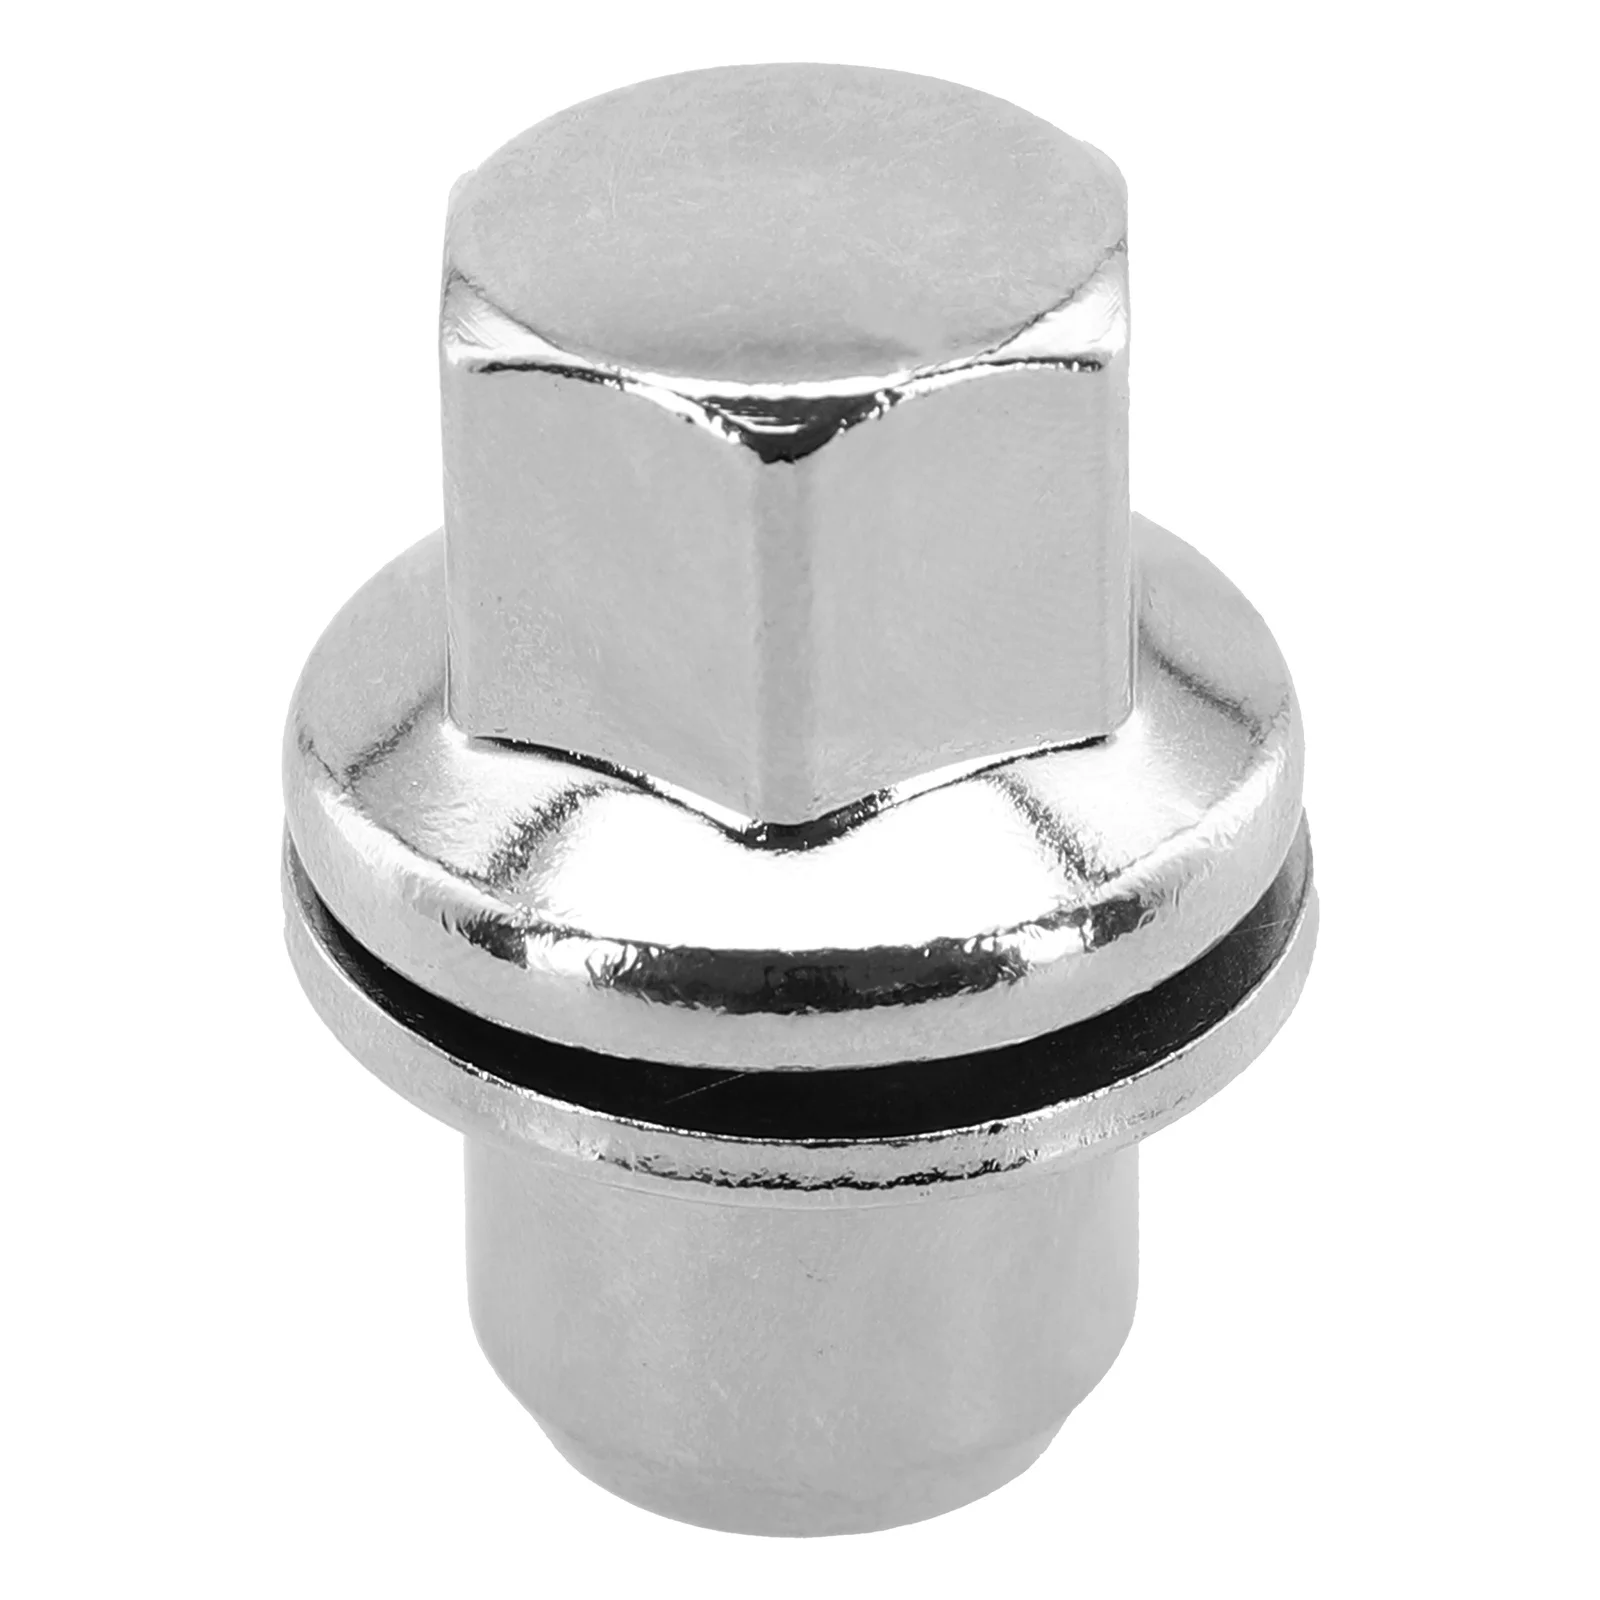 

Car Wheel Nut Durable High Quality Practical Silver Solid Design Steel Chrome Plating For Discovery